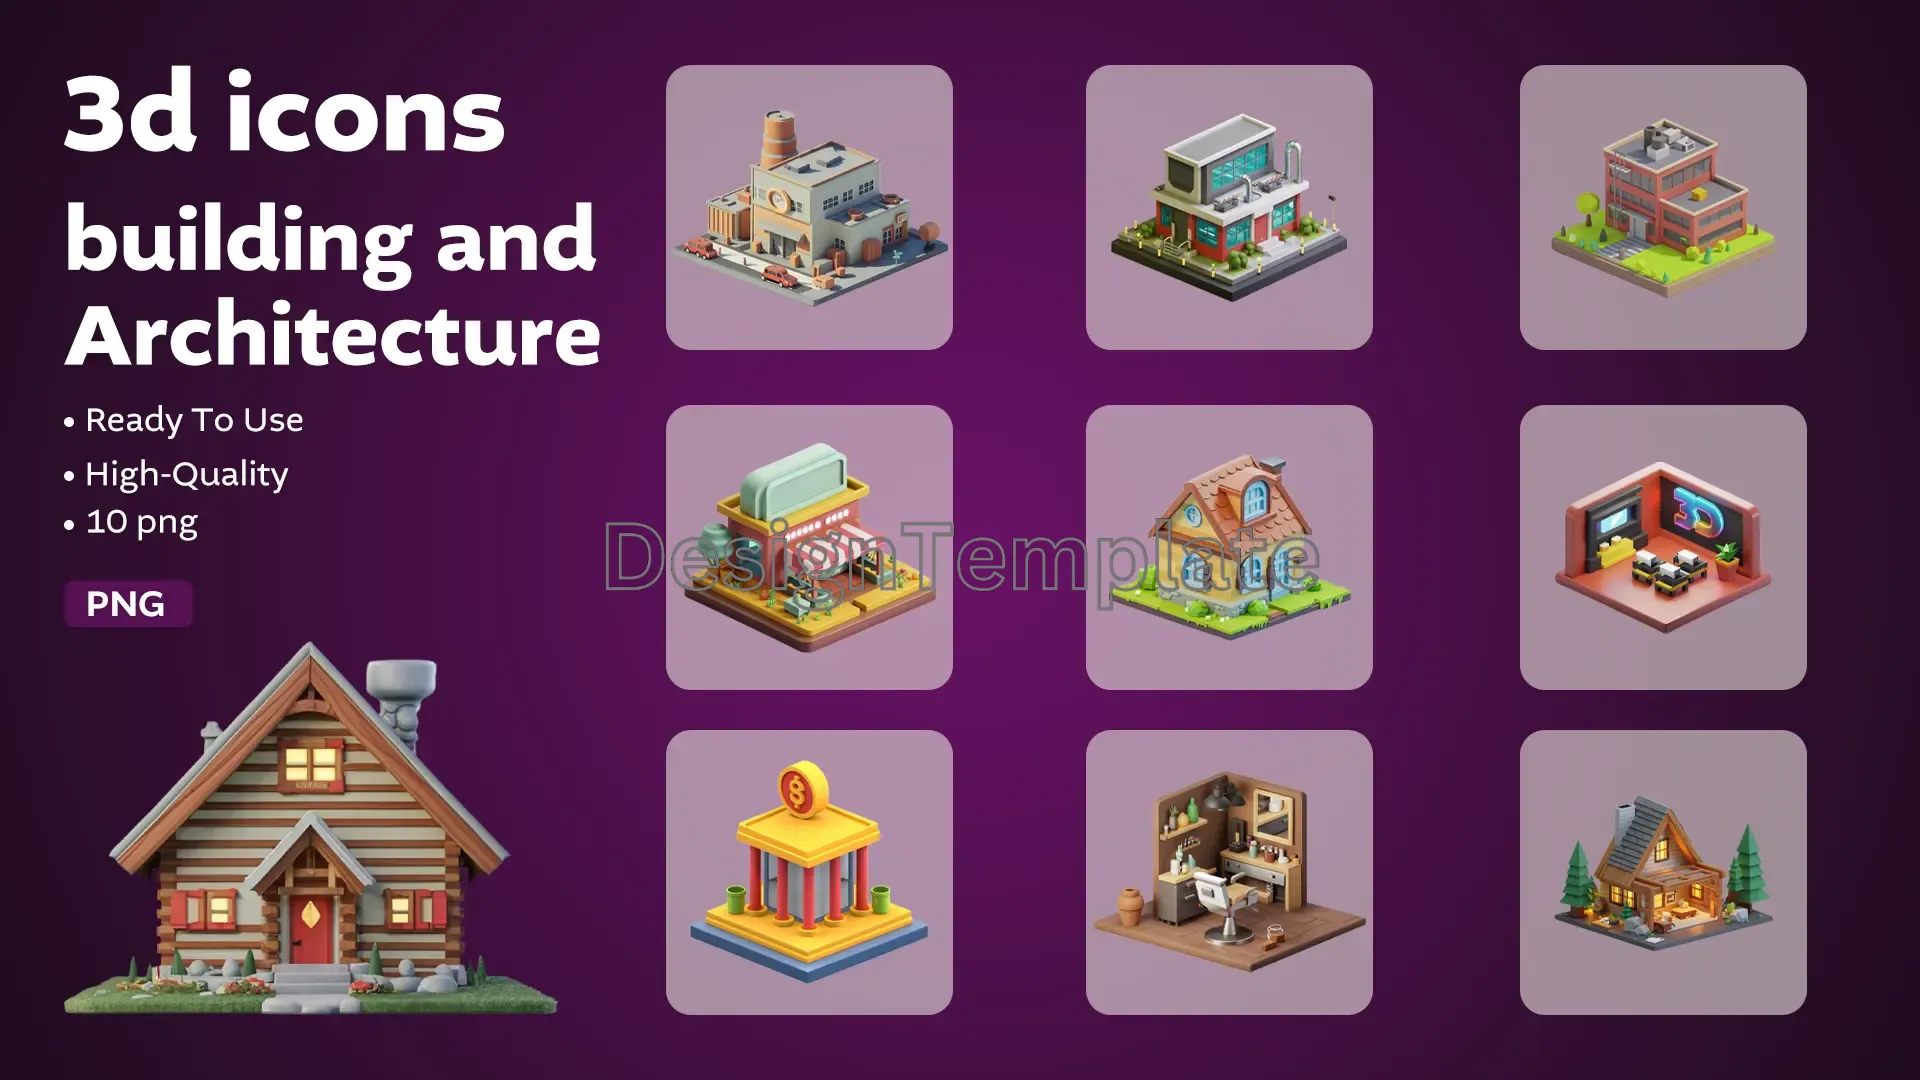 Architectural Elements Dynamic 3D Icons image